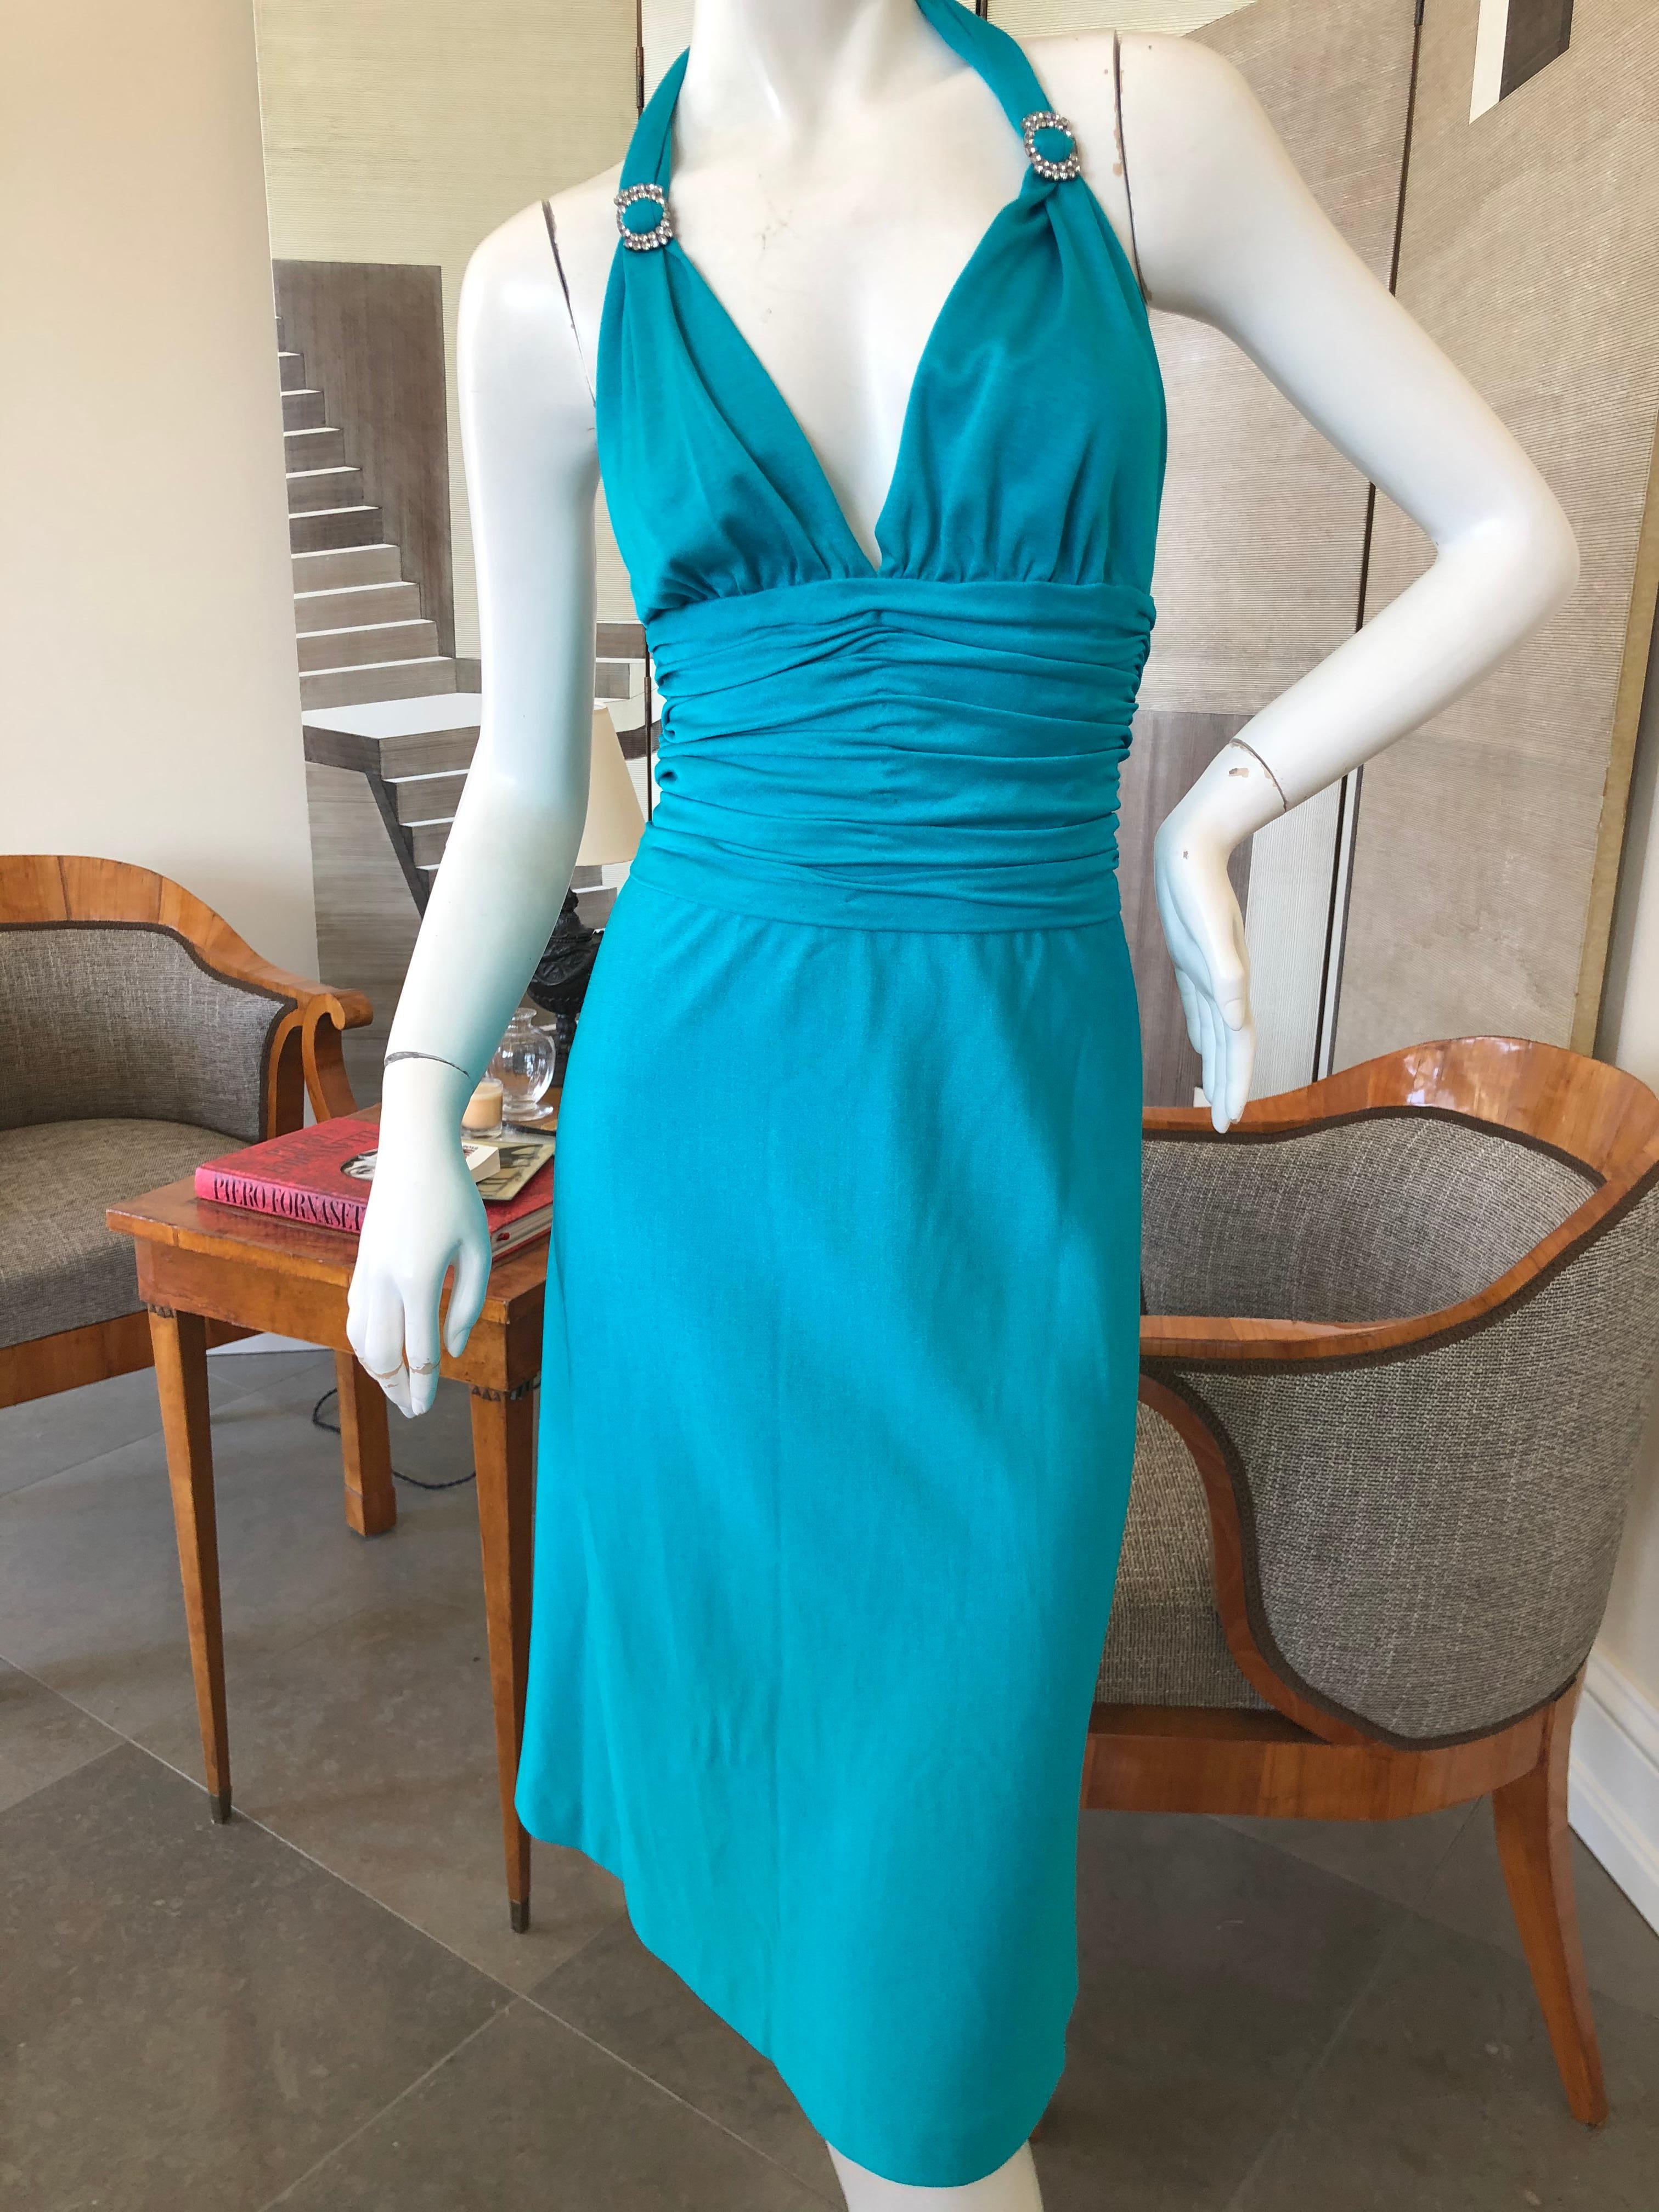 Women's Loris Azzaro Couture 70's Low Cut Blue Cocktail Dress with Crystal Accents For Sale